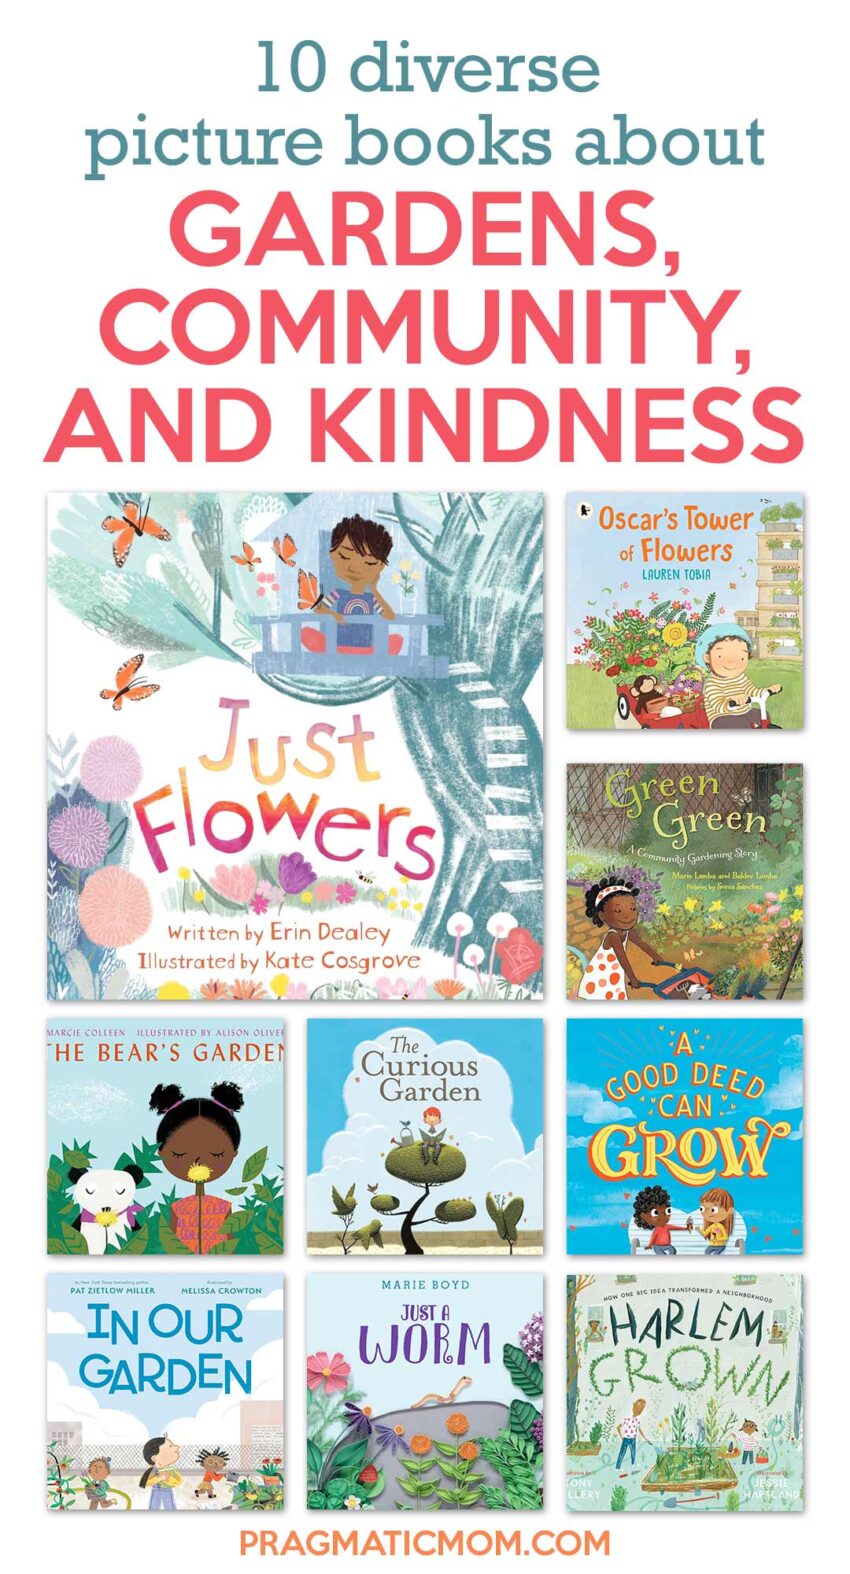 10 Diverse Picture Books about Gardens, Community, and Kindness